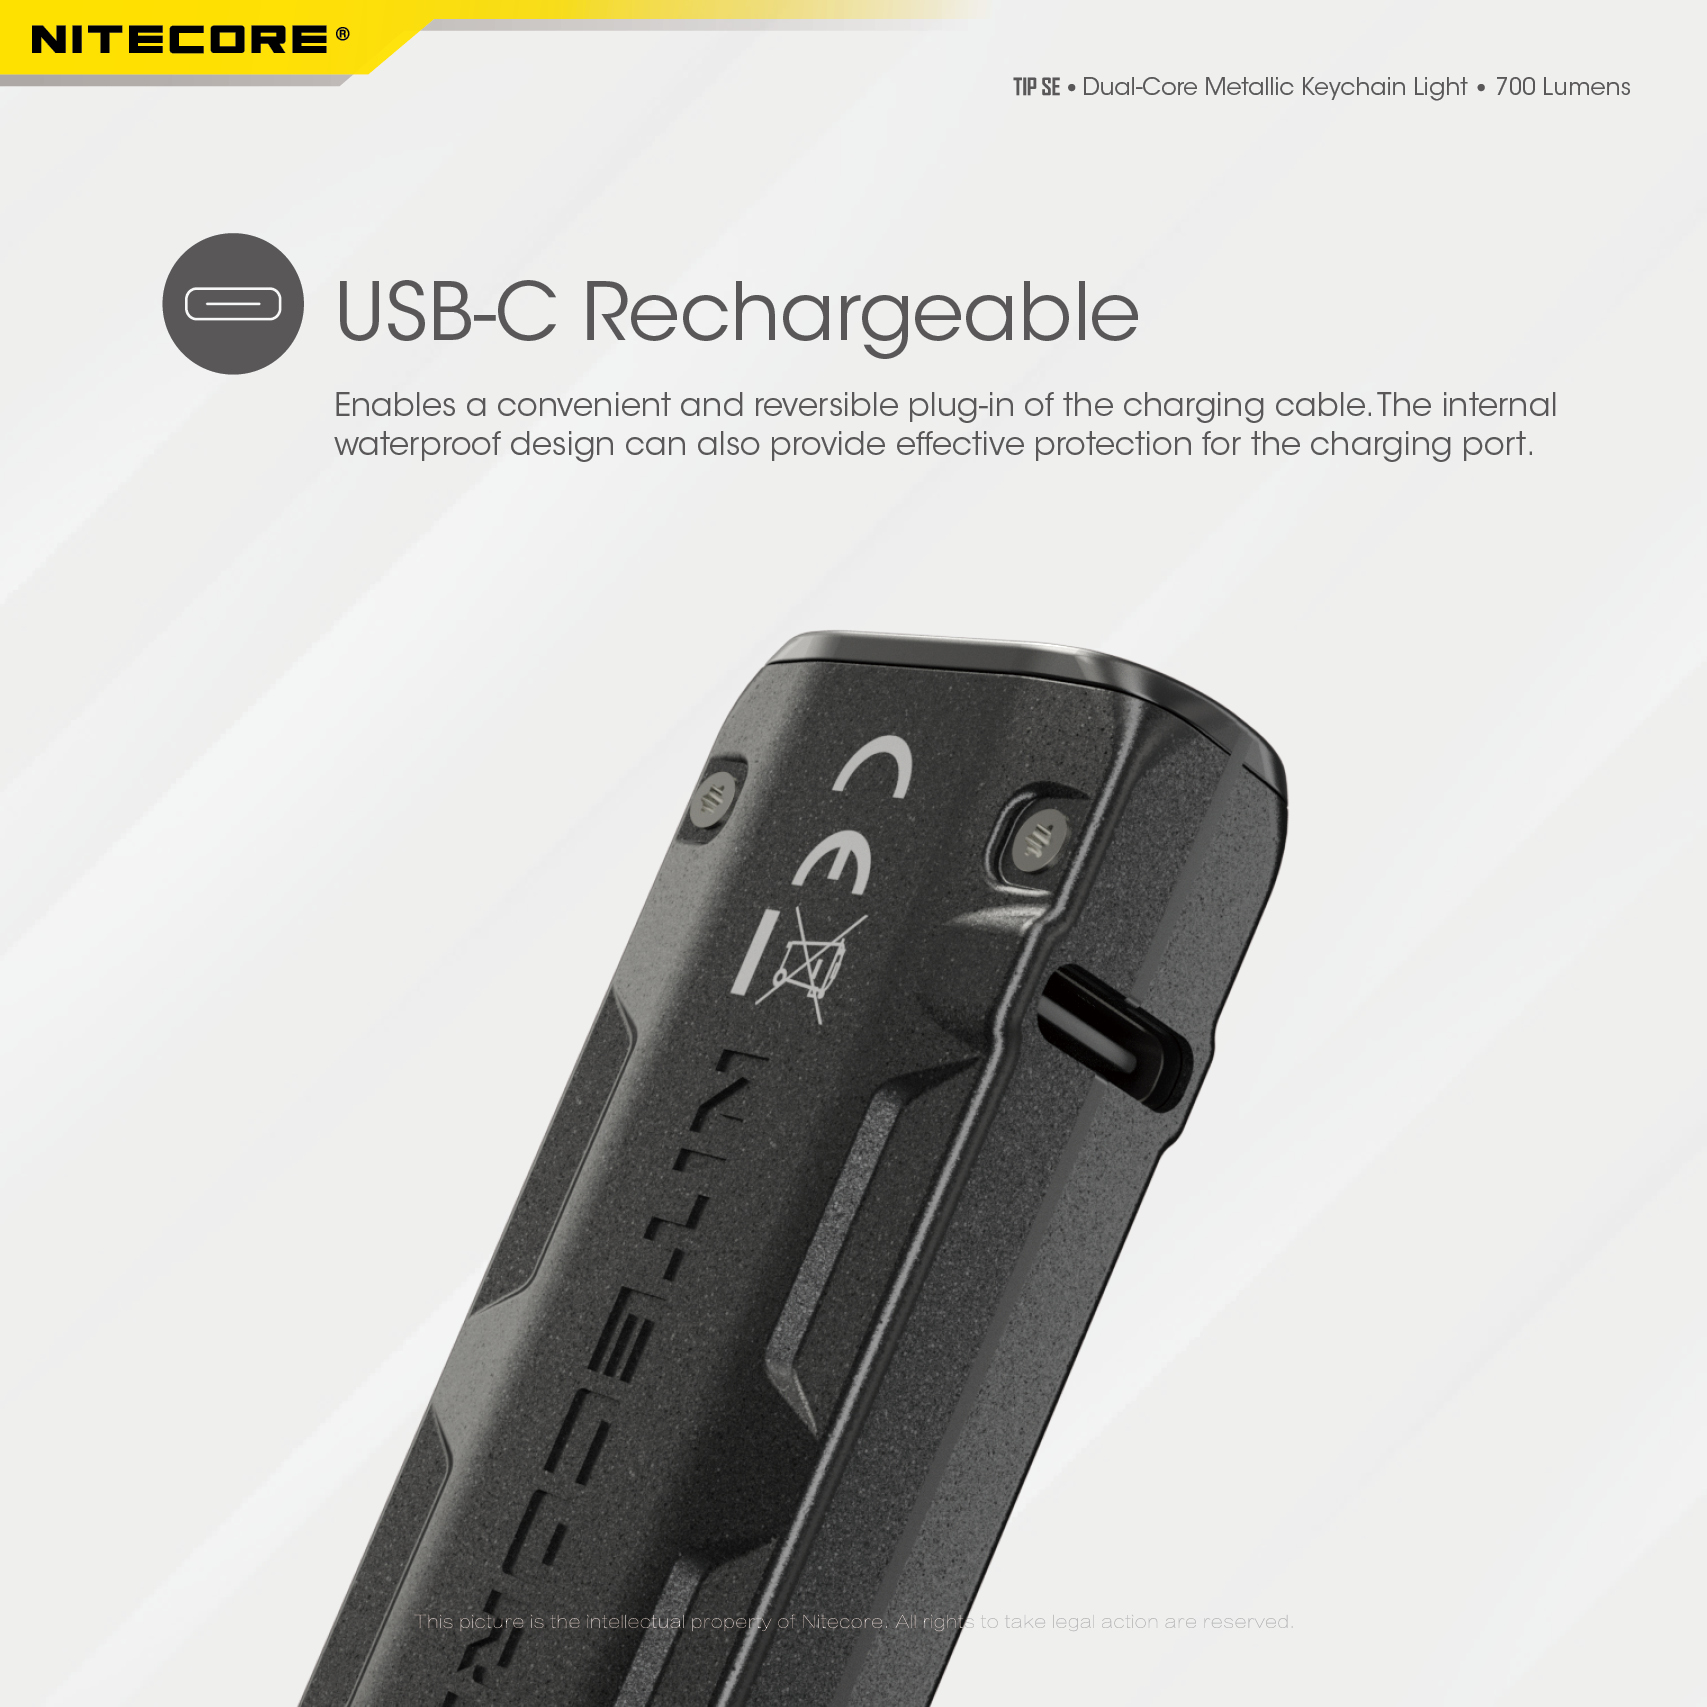 NITECORE-TIP-SE-700LM-P8-Dual-Light-LED-Keychain-Flashlight-Type-C-Rechargeable-QC-Every-Day-Carry-M-1976045-4